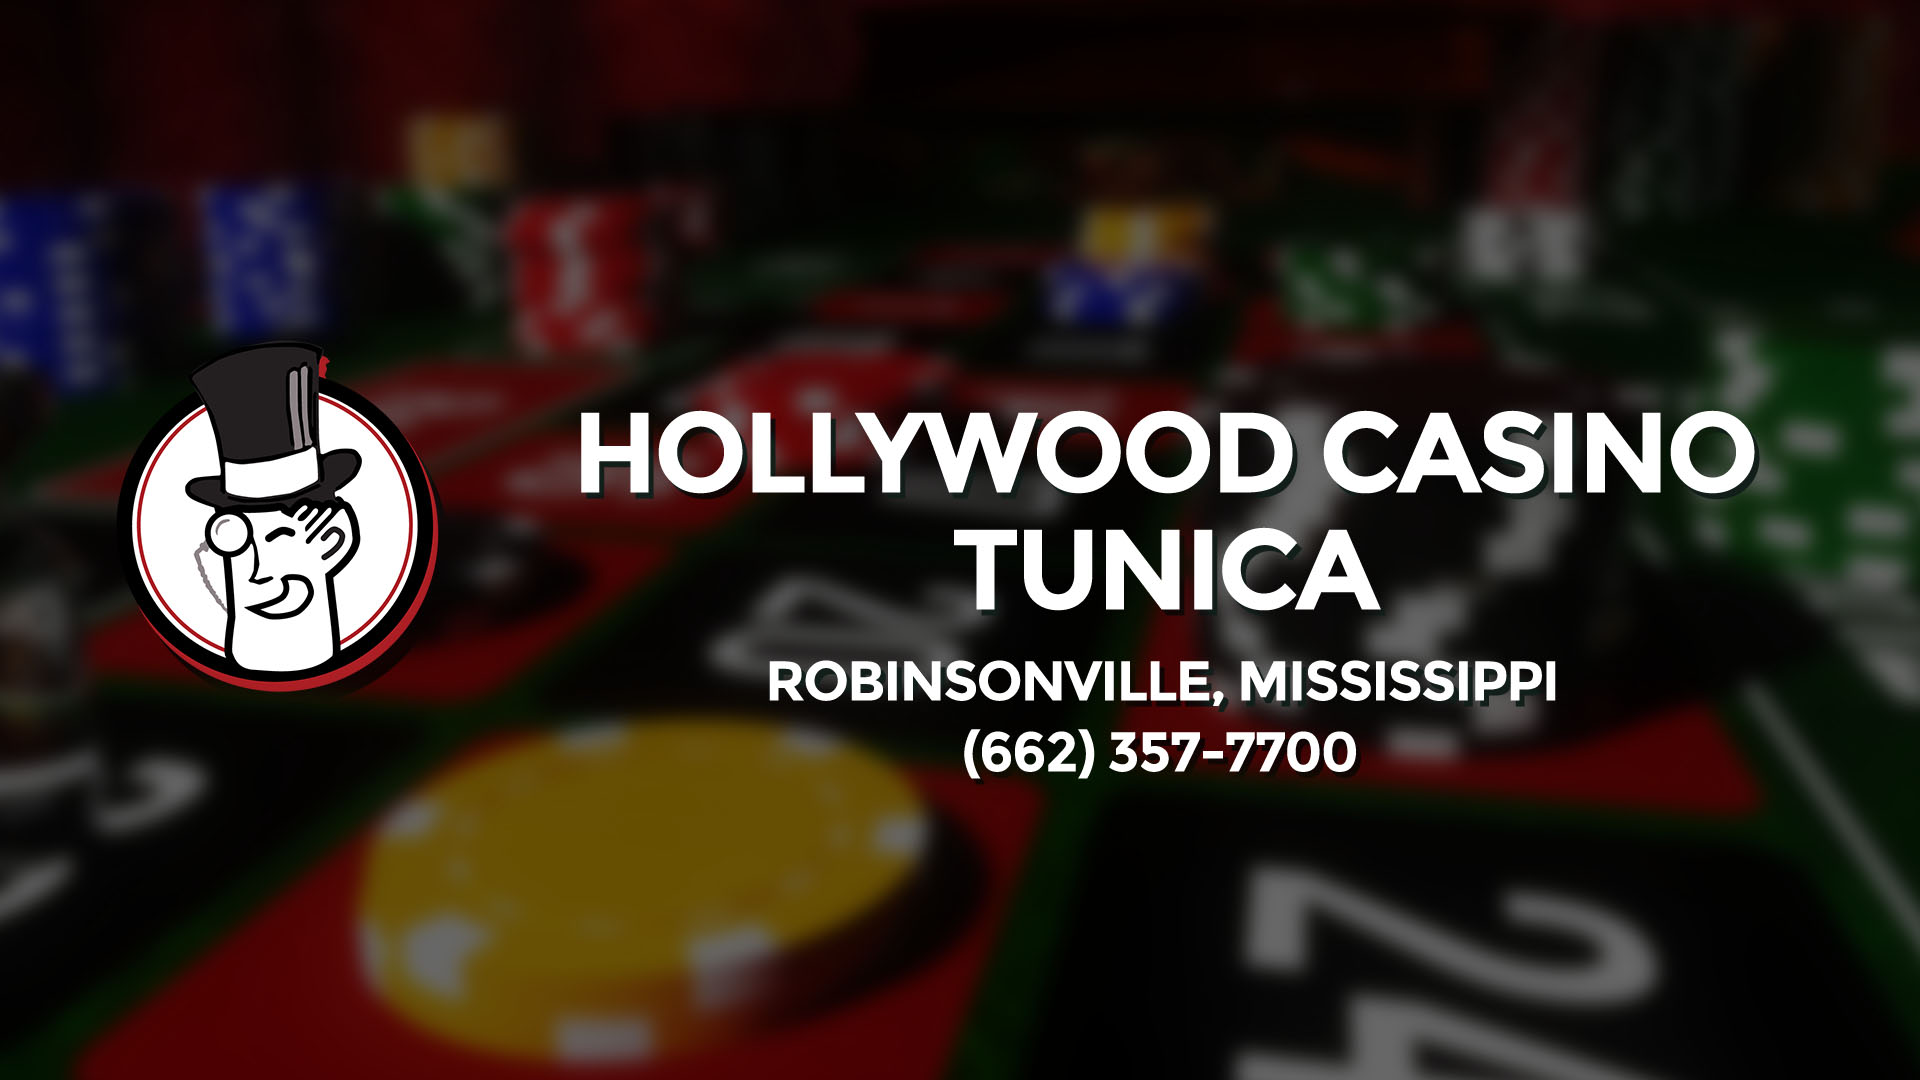 phone number for hollywood casino tunica mississippi